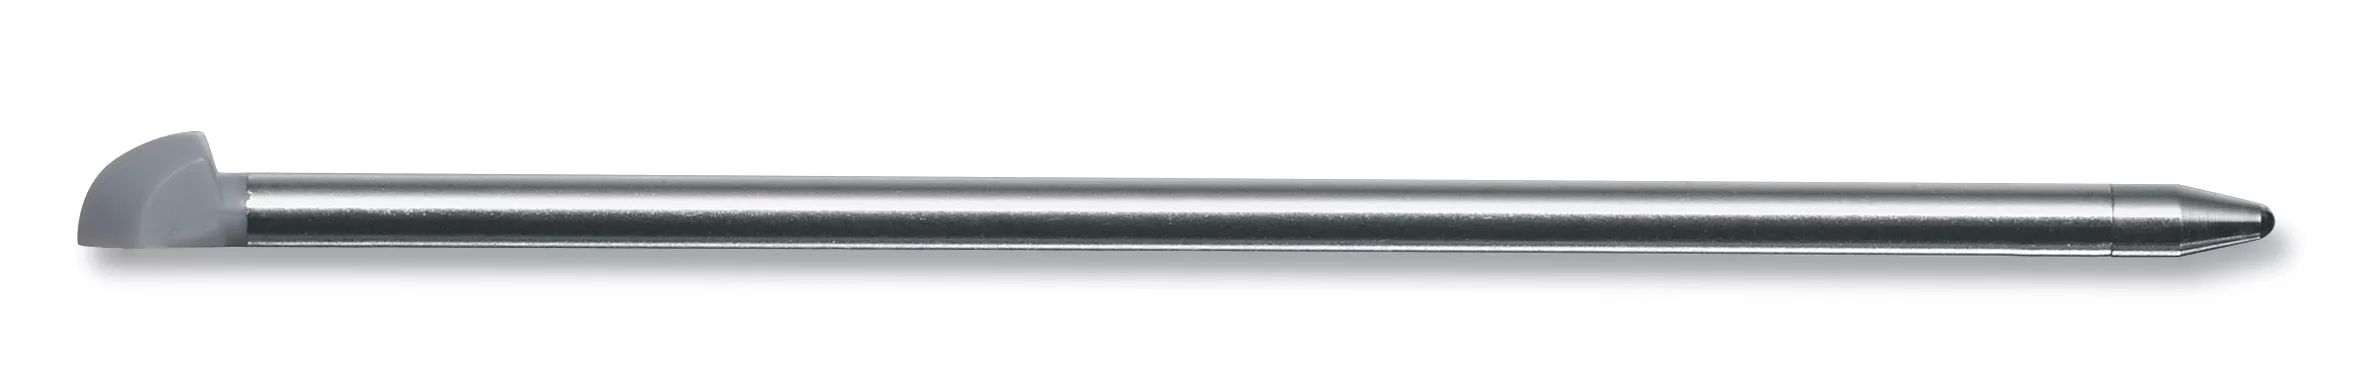 Large Replacement Pen-A.3644